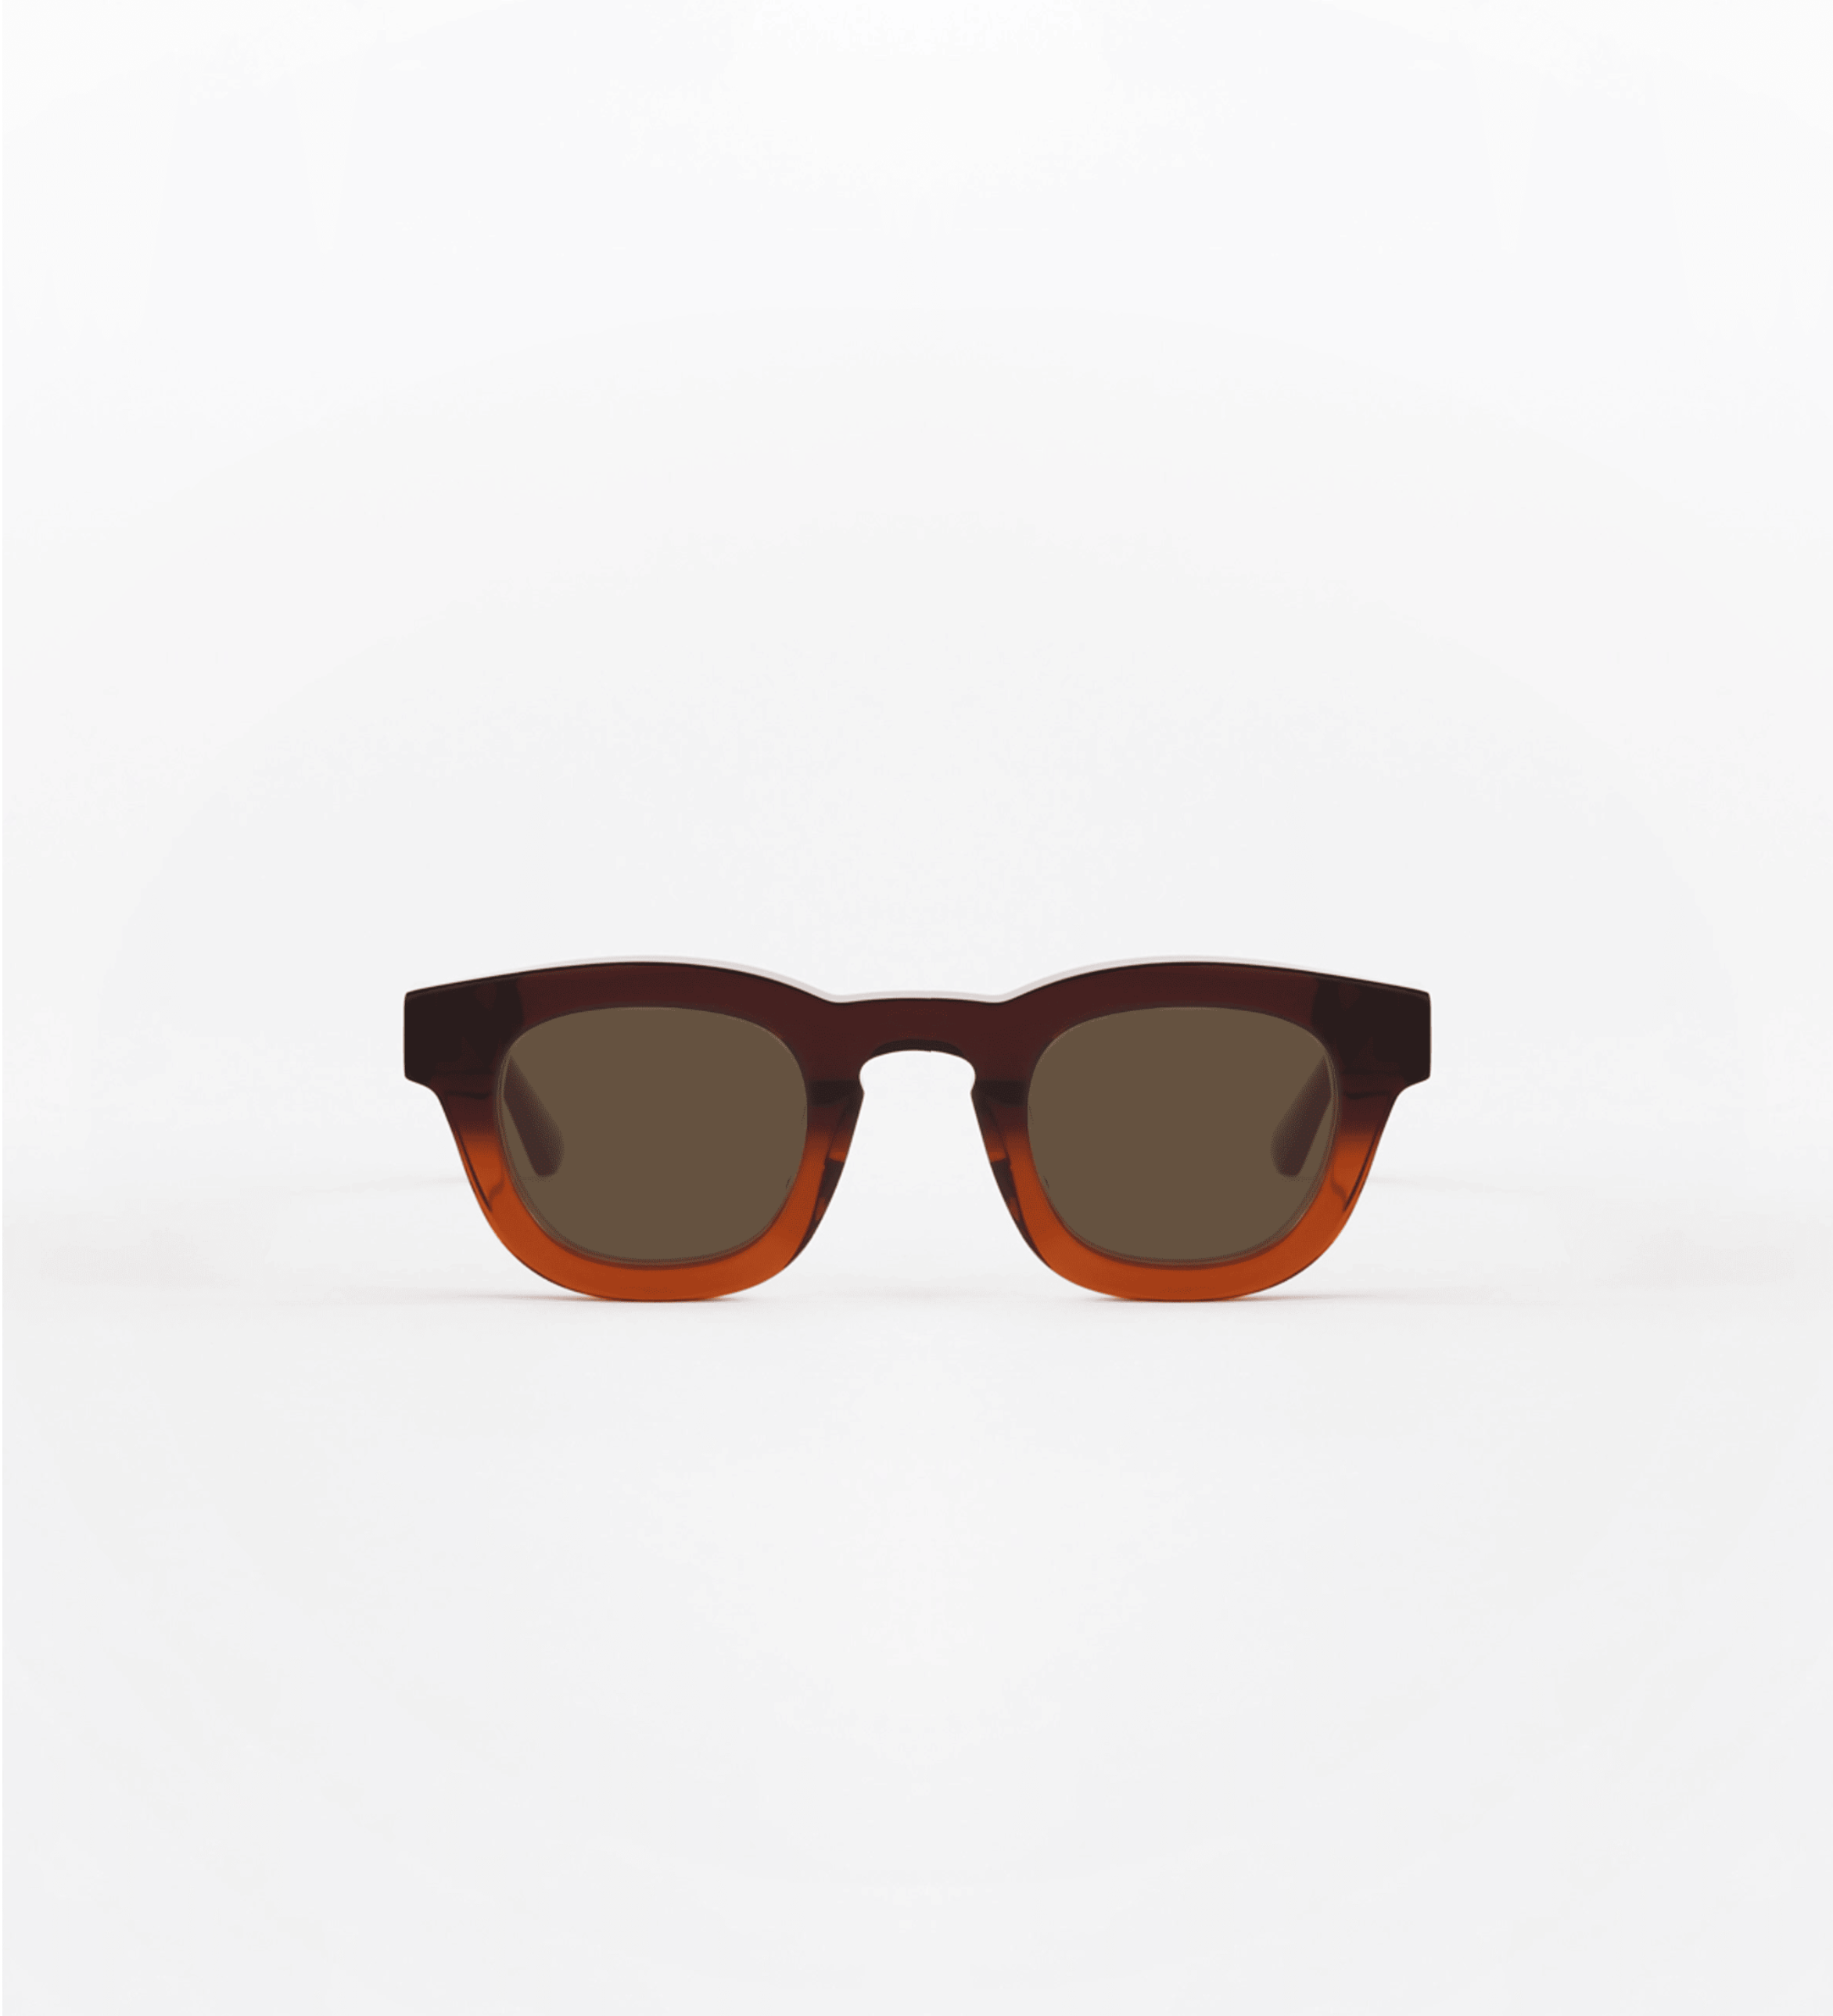 VENICE-BROWNFADE-SUNGLASSES1.png